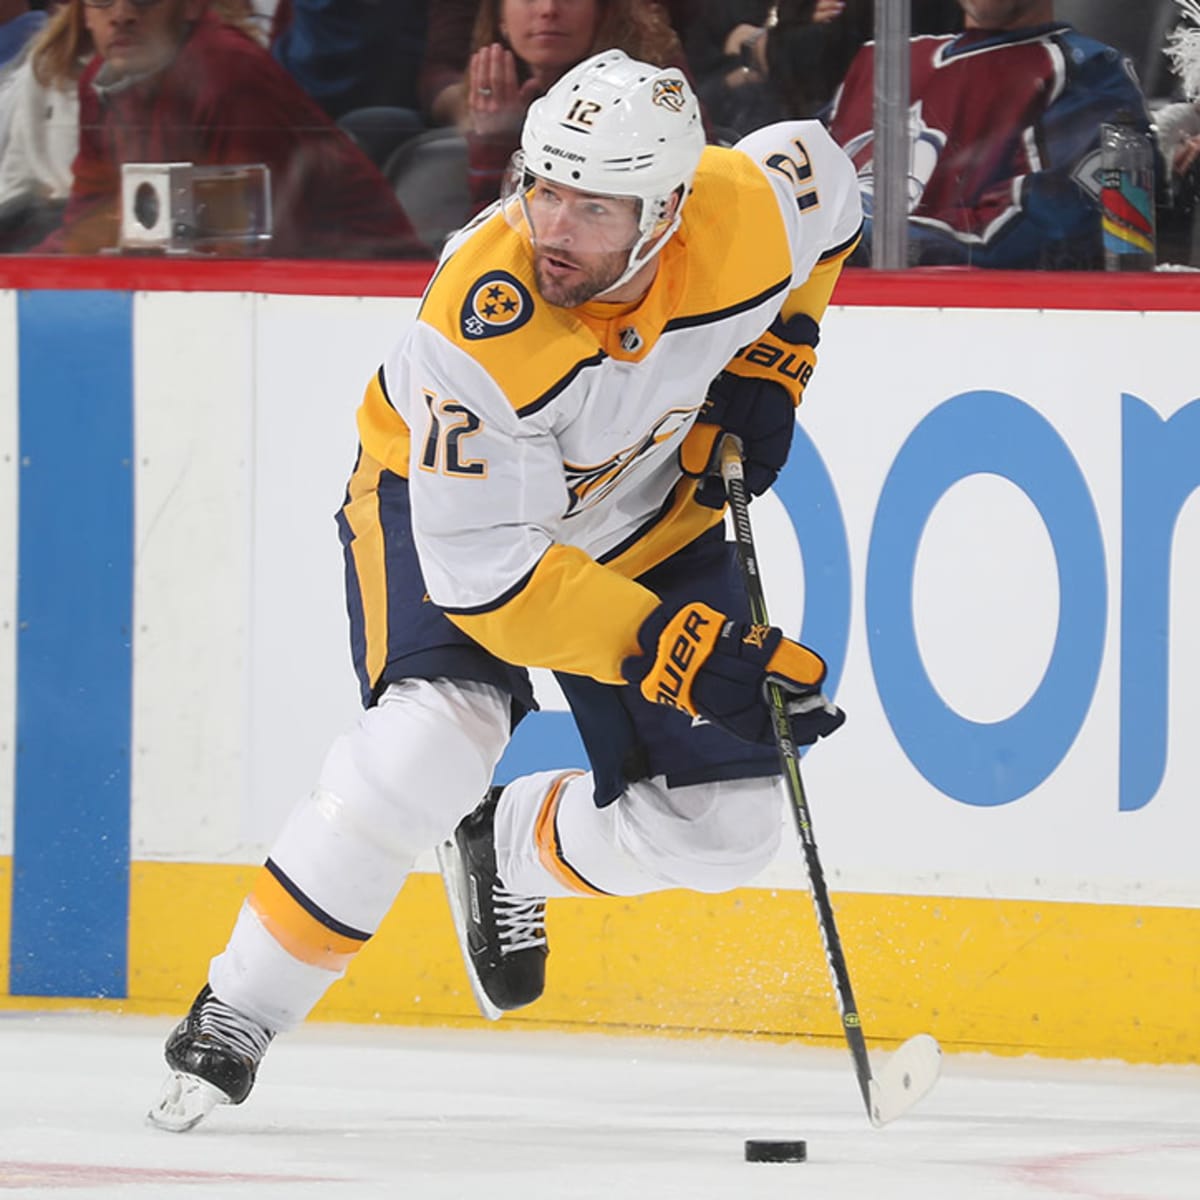 Mike Fisher set to make 2018 debut with Preds